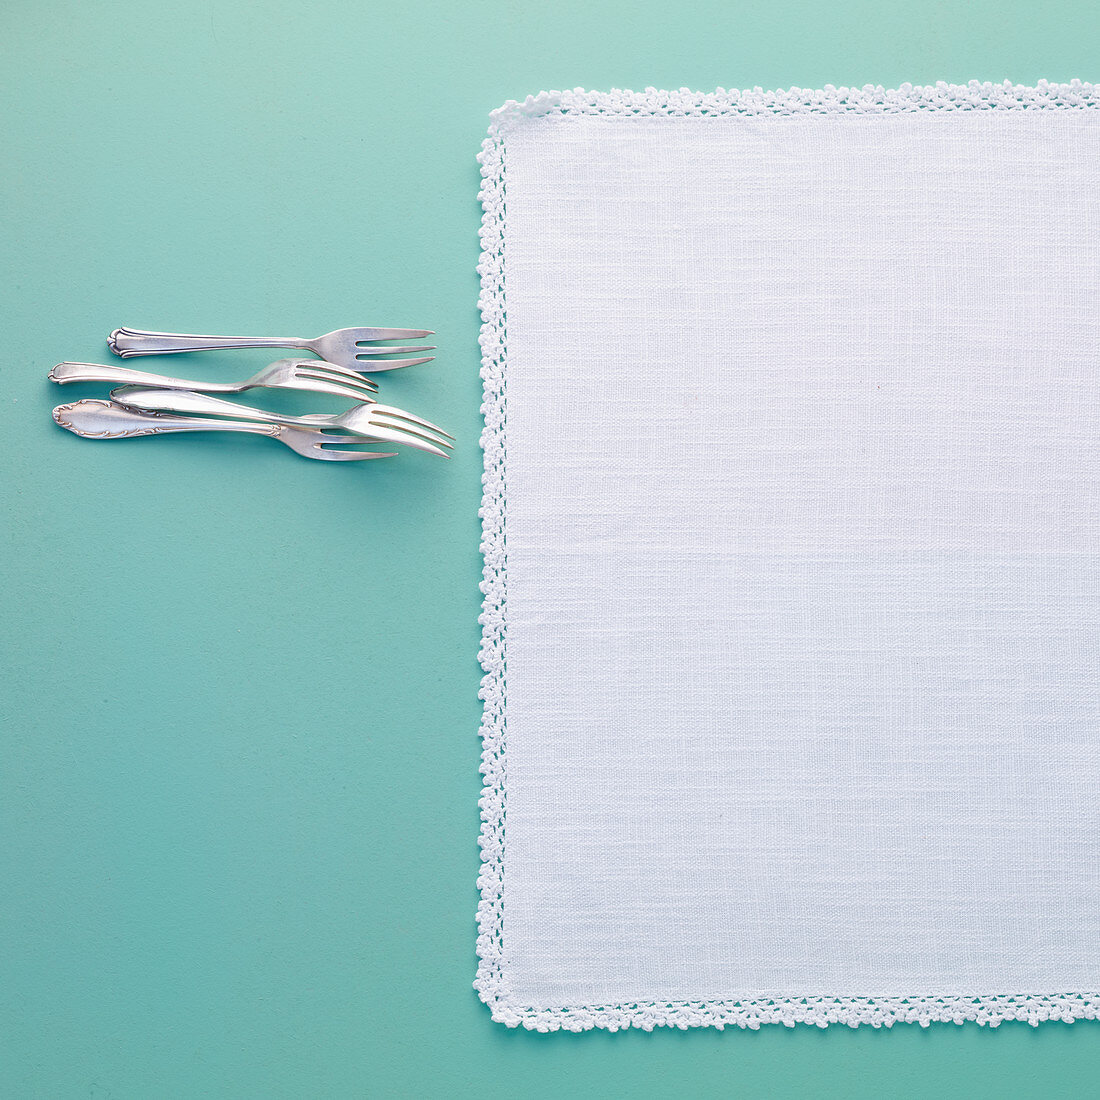 Linen tablecloth with a lace border and cake forks